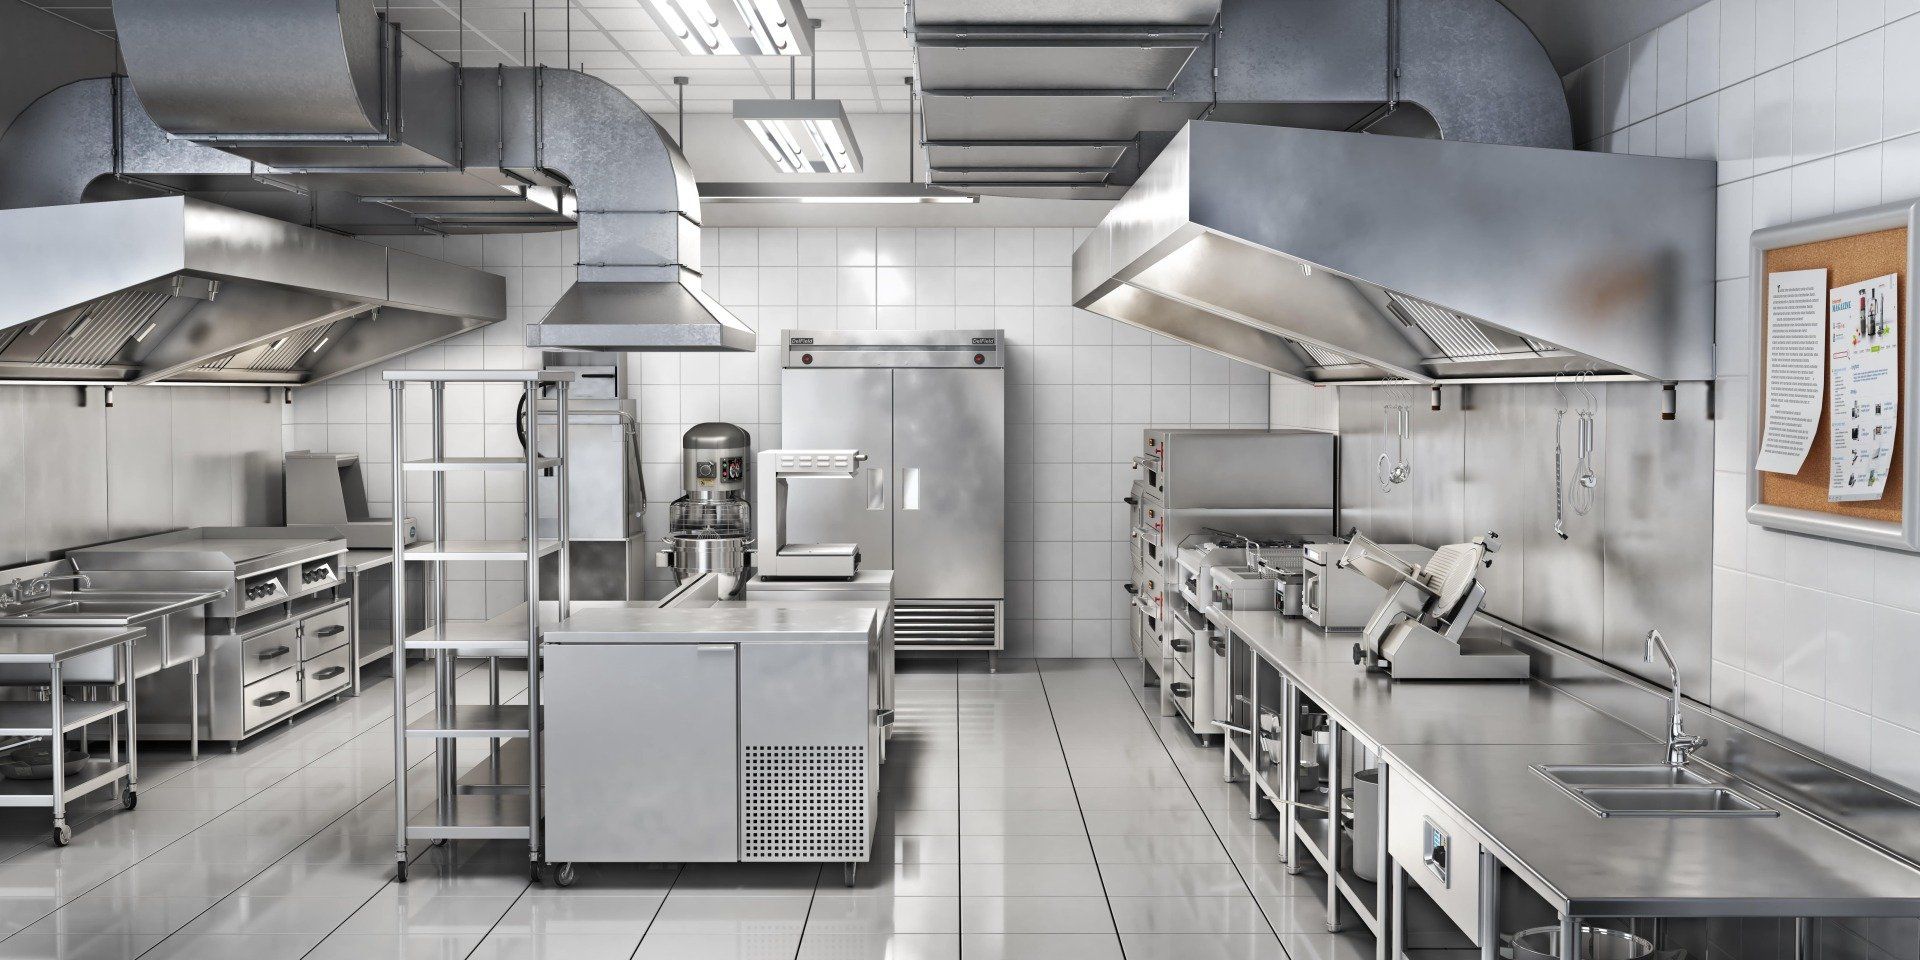 Commercial kitchen practices that benefit grease traps and plumbing